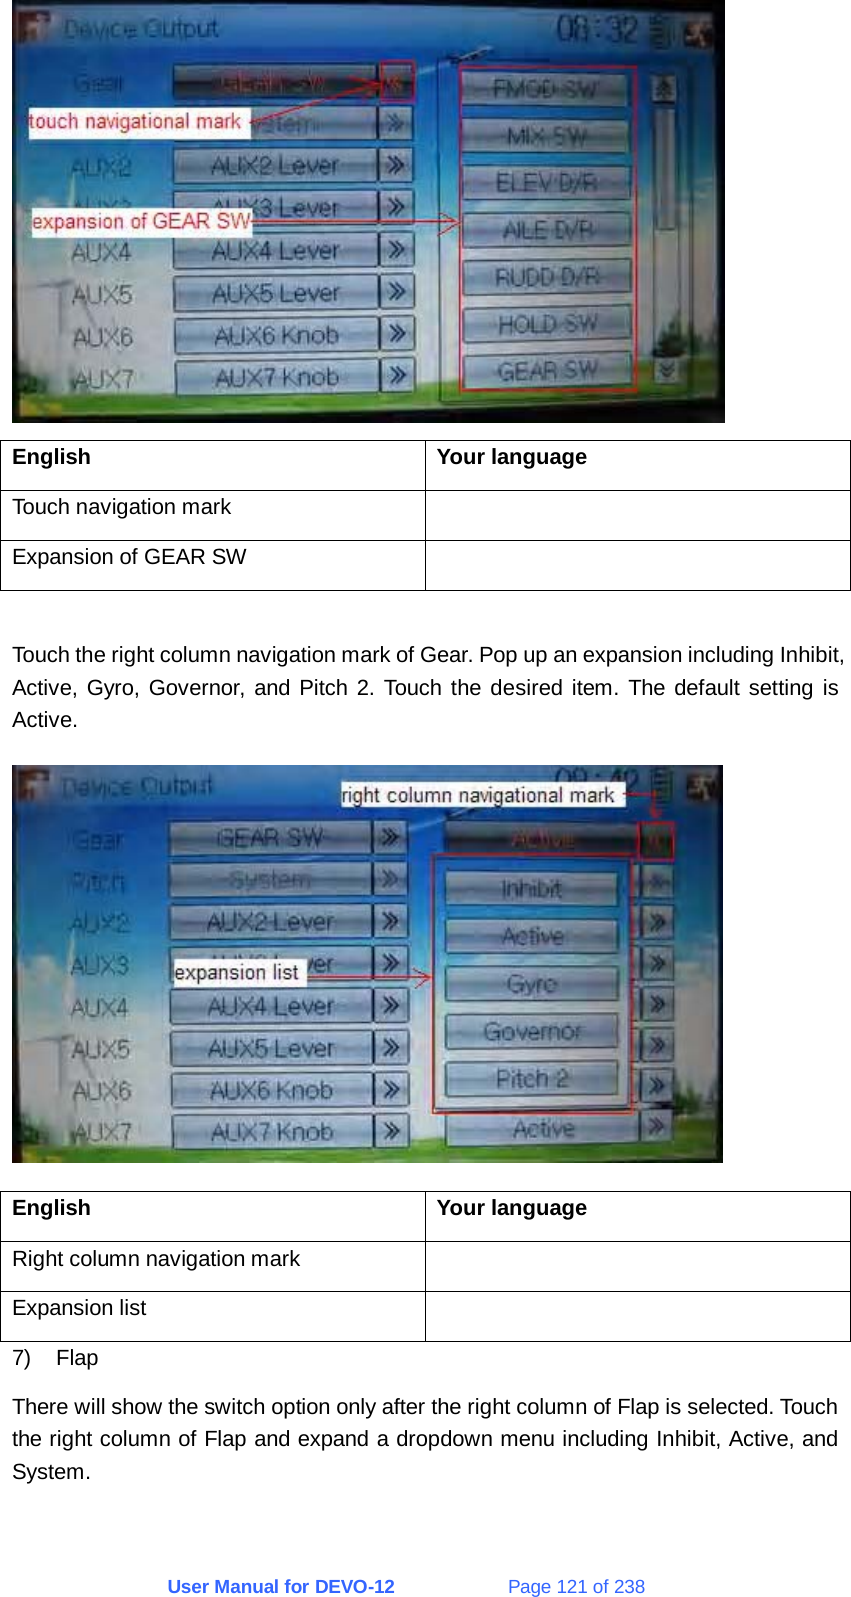 User Manual for DEVO-12             Page 121 of 238  English Your language Touch navigation mark   Expansion of GEAR SW    Touch the right column navigation mark of Gear. Pop up an expansion including Inhibit, Active, Gyro, Governor, and Pitch 2. Touch the desired item. The default setting is Active.  English Your language Right column navigation mark   Expansion list   7) Flap There will show the switch option only after the right column of Flap is selected. Touch the right column of Flap and expand a dropdown menu including Inhibit, Active, and System. 